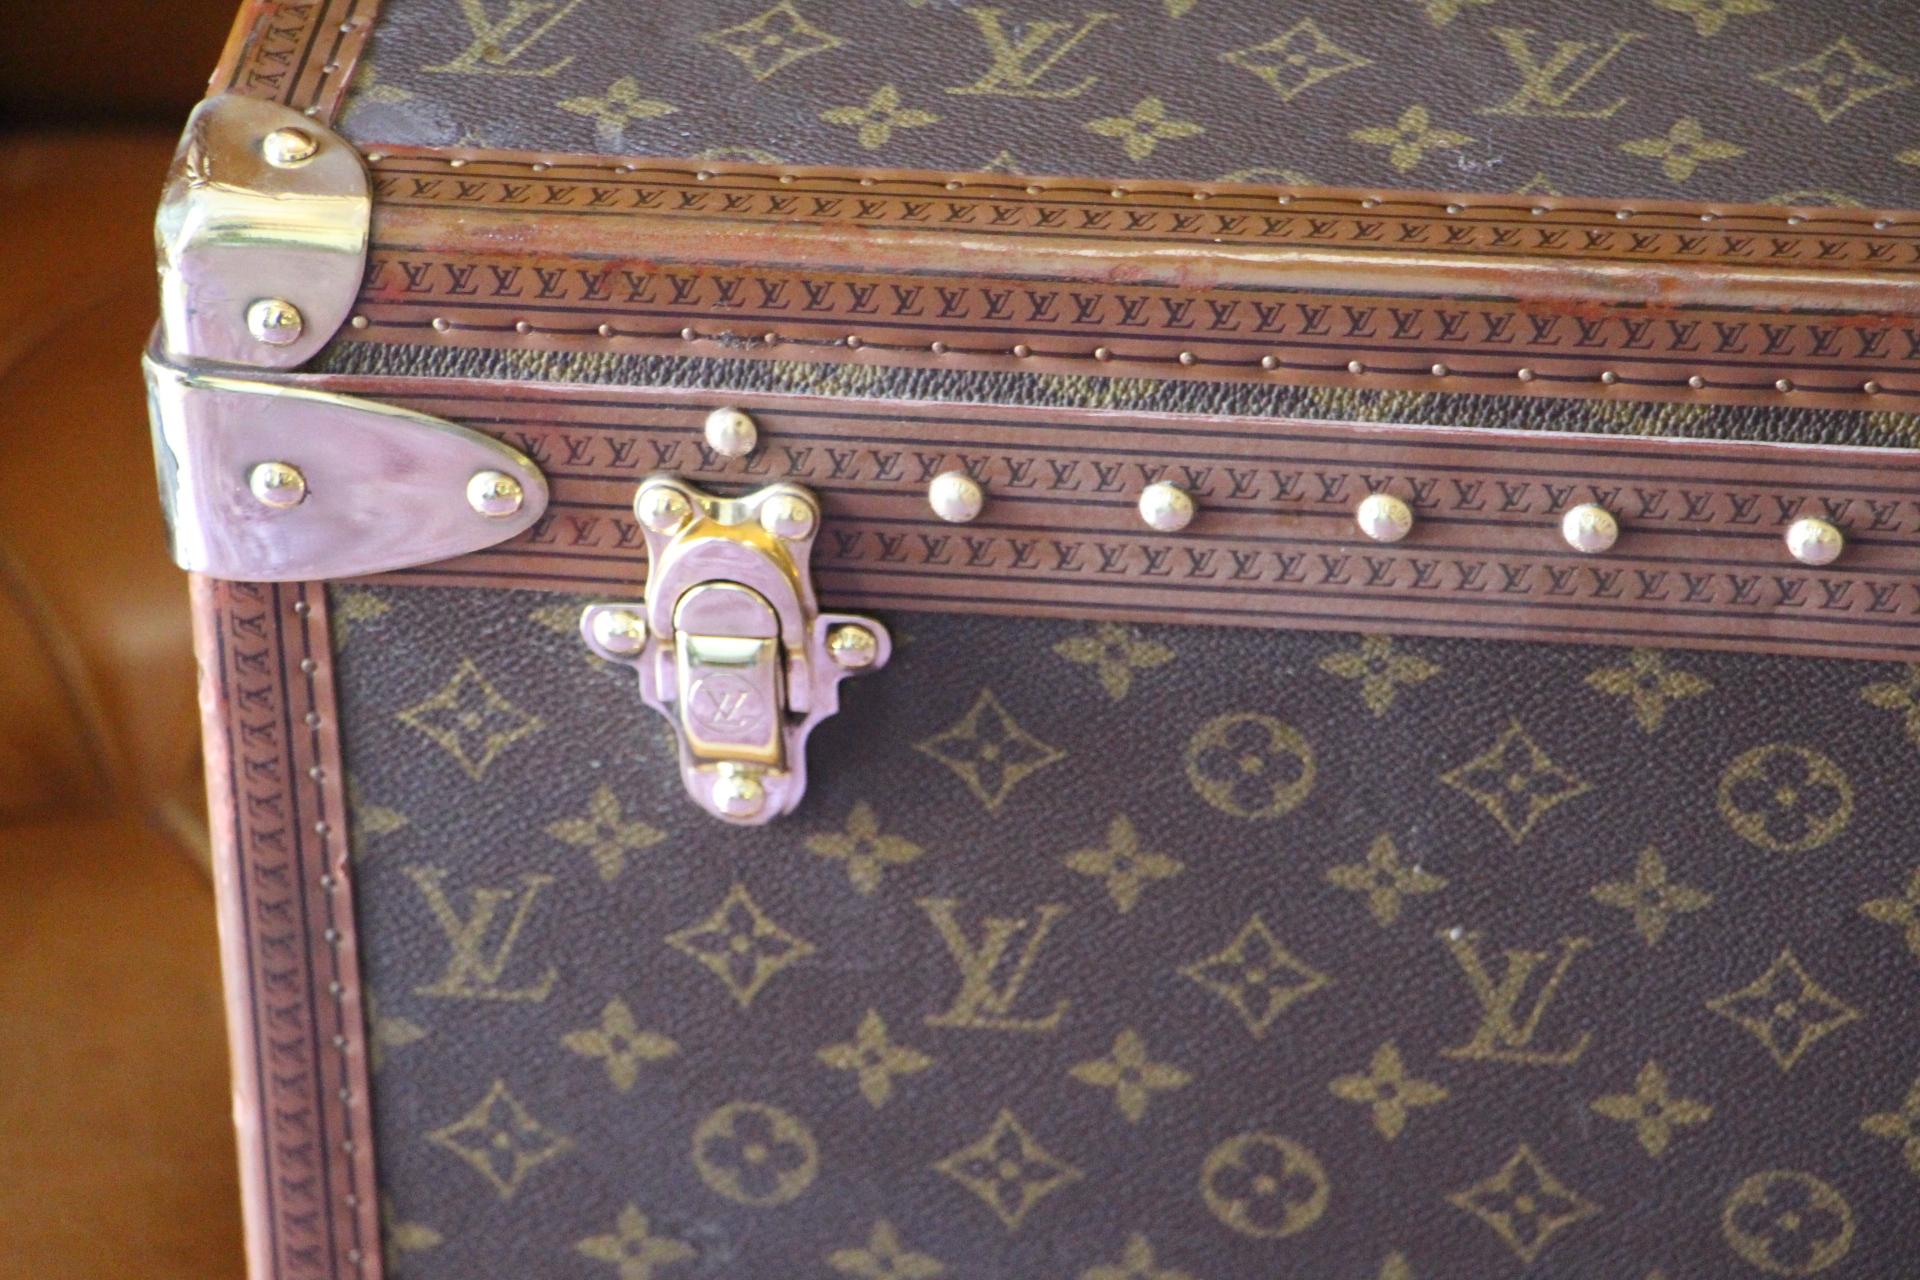 Magnificent Louis Vuitton Alzer monogramm suitcase. This 80 cm suitcase is the largest one made by Louis Vuitton.
All Louis Vuitton stamped solid brass fittings: locks, clasps and studs.It comes with its original LV leather name holder and its